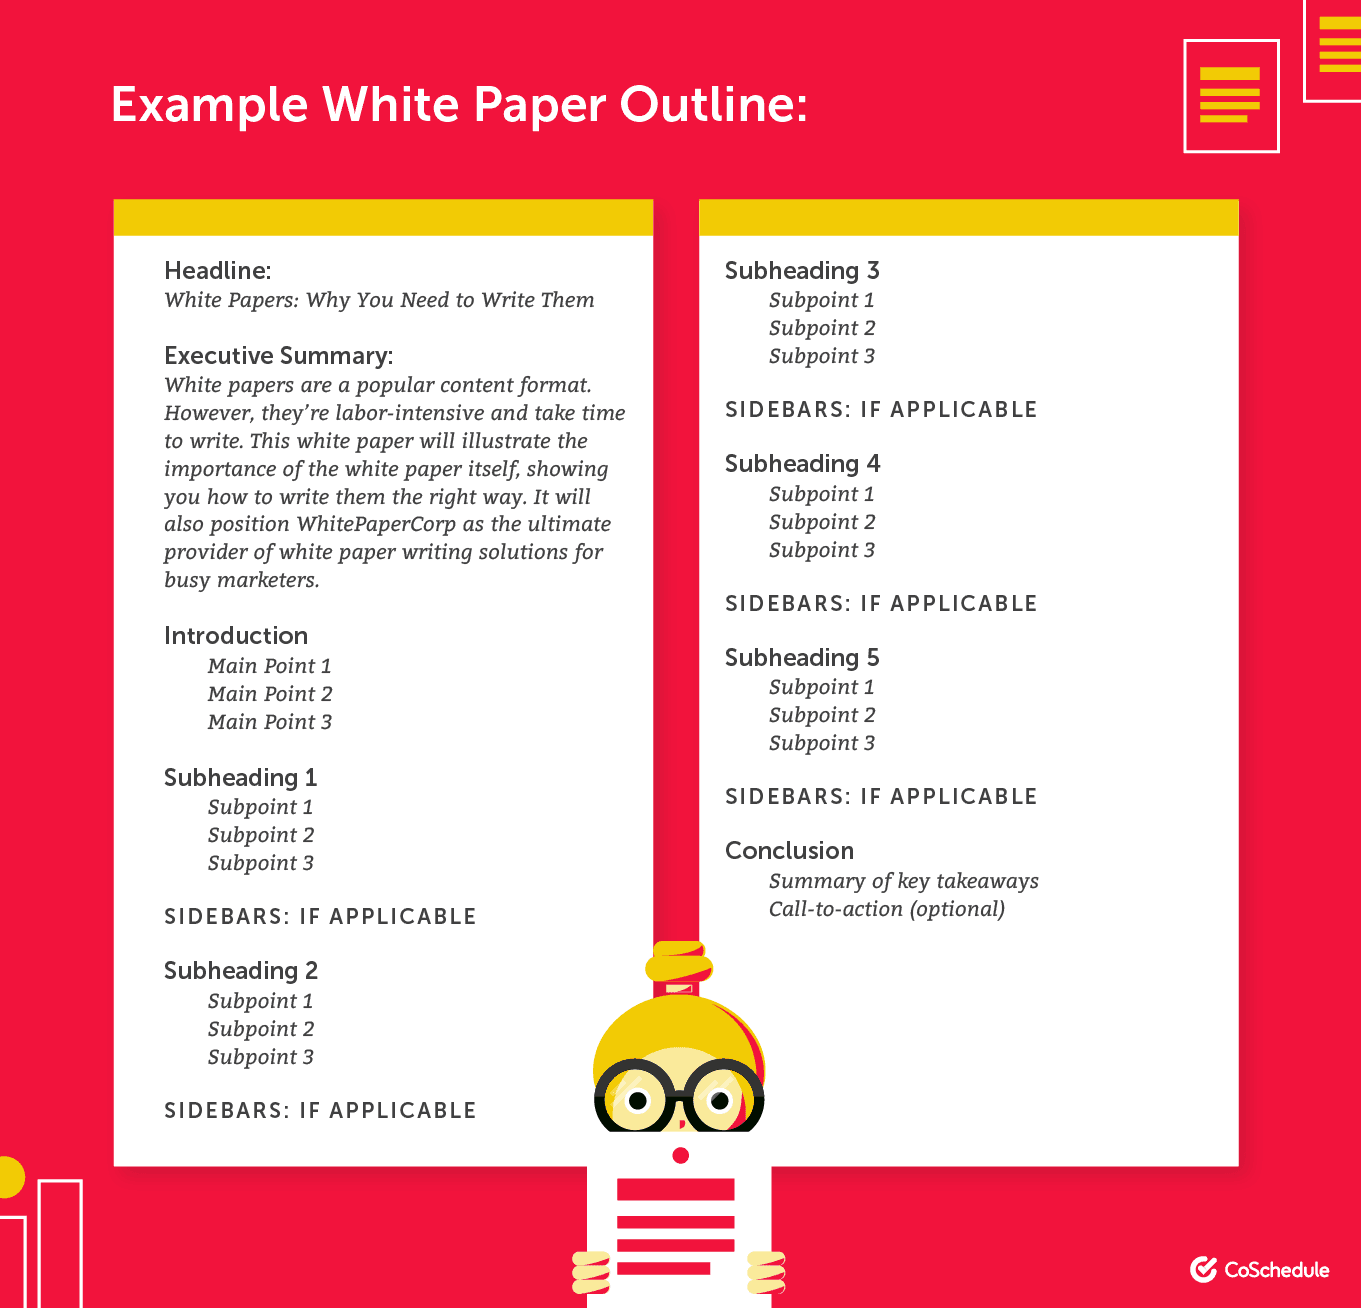 an example of a white paper